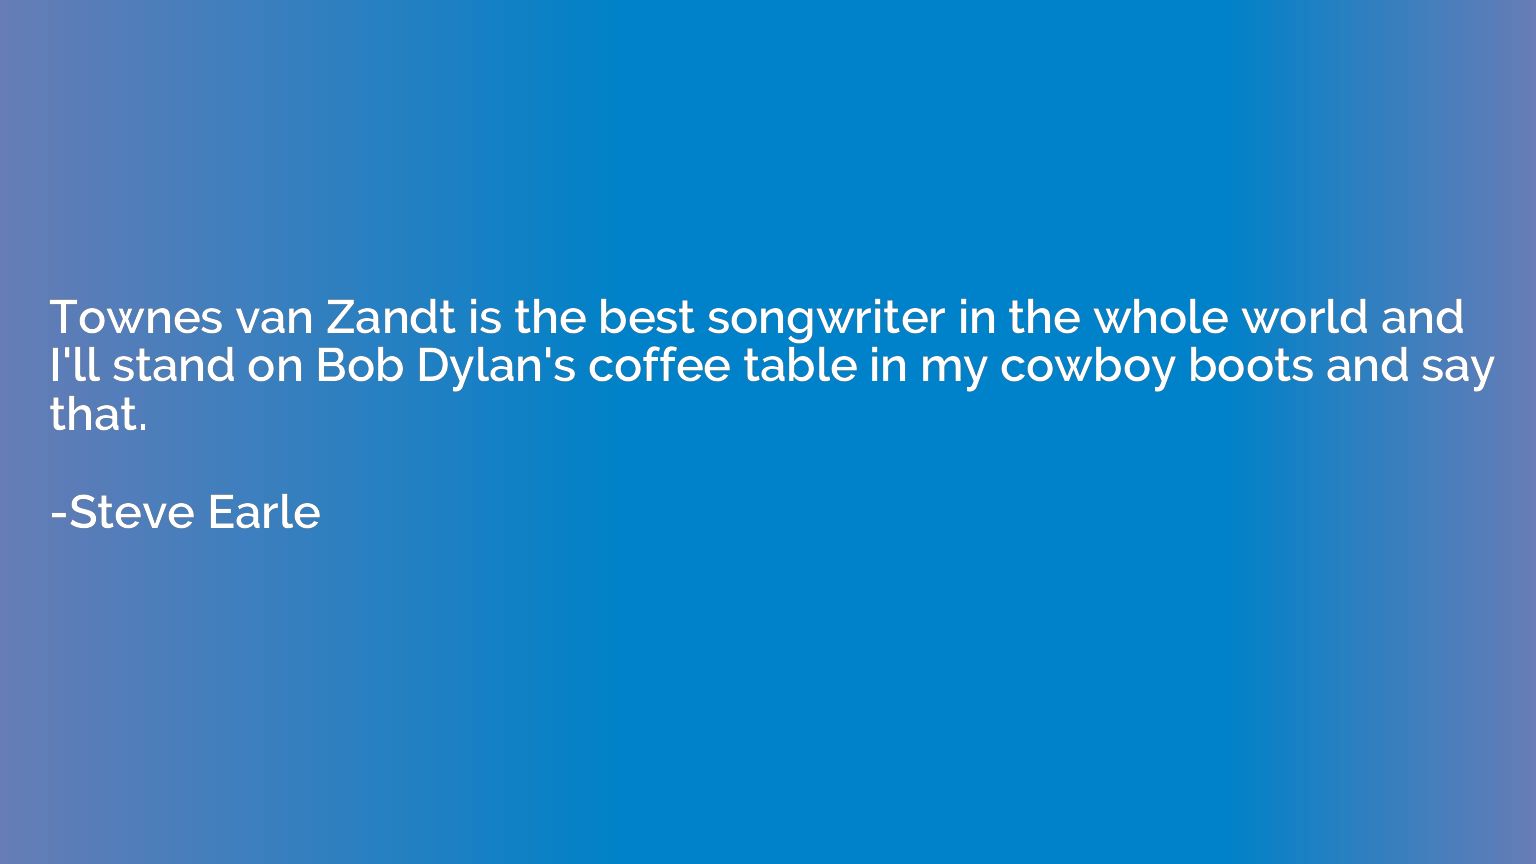 Townes van Zandt is the best songwriter in the whole world a